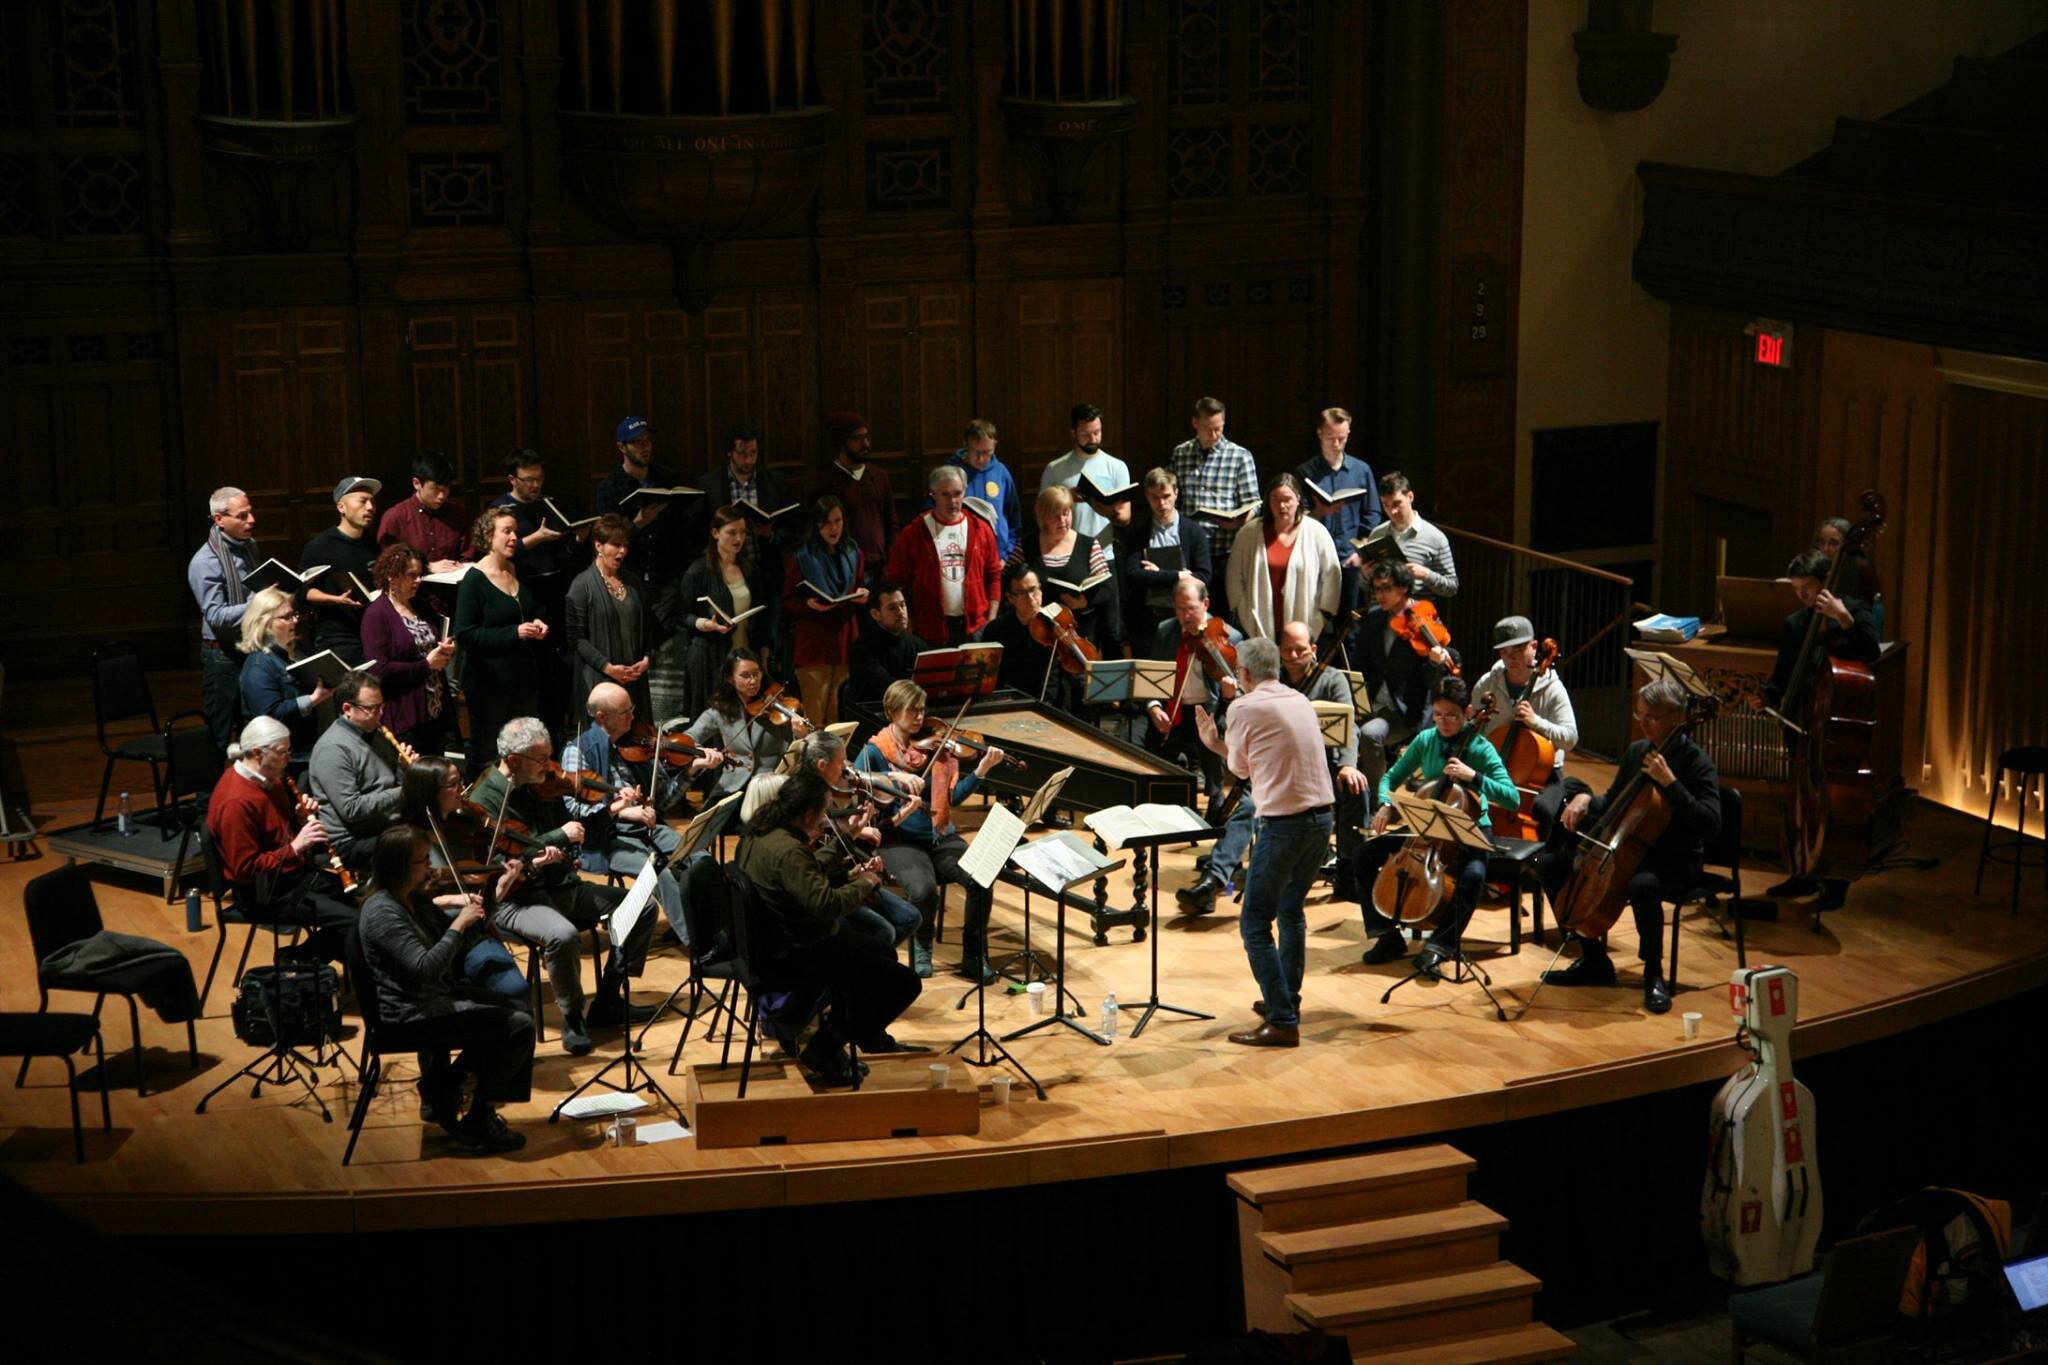  Taurins and Tafelmusik in rehearsal.  